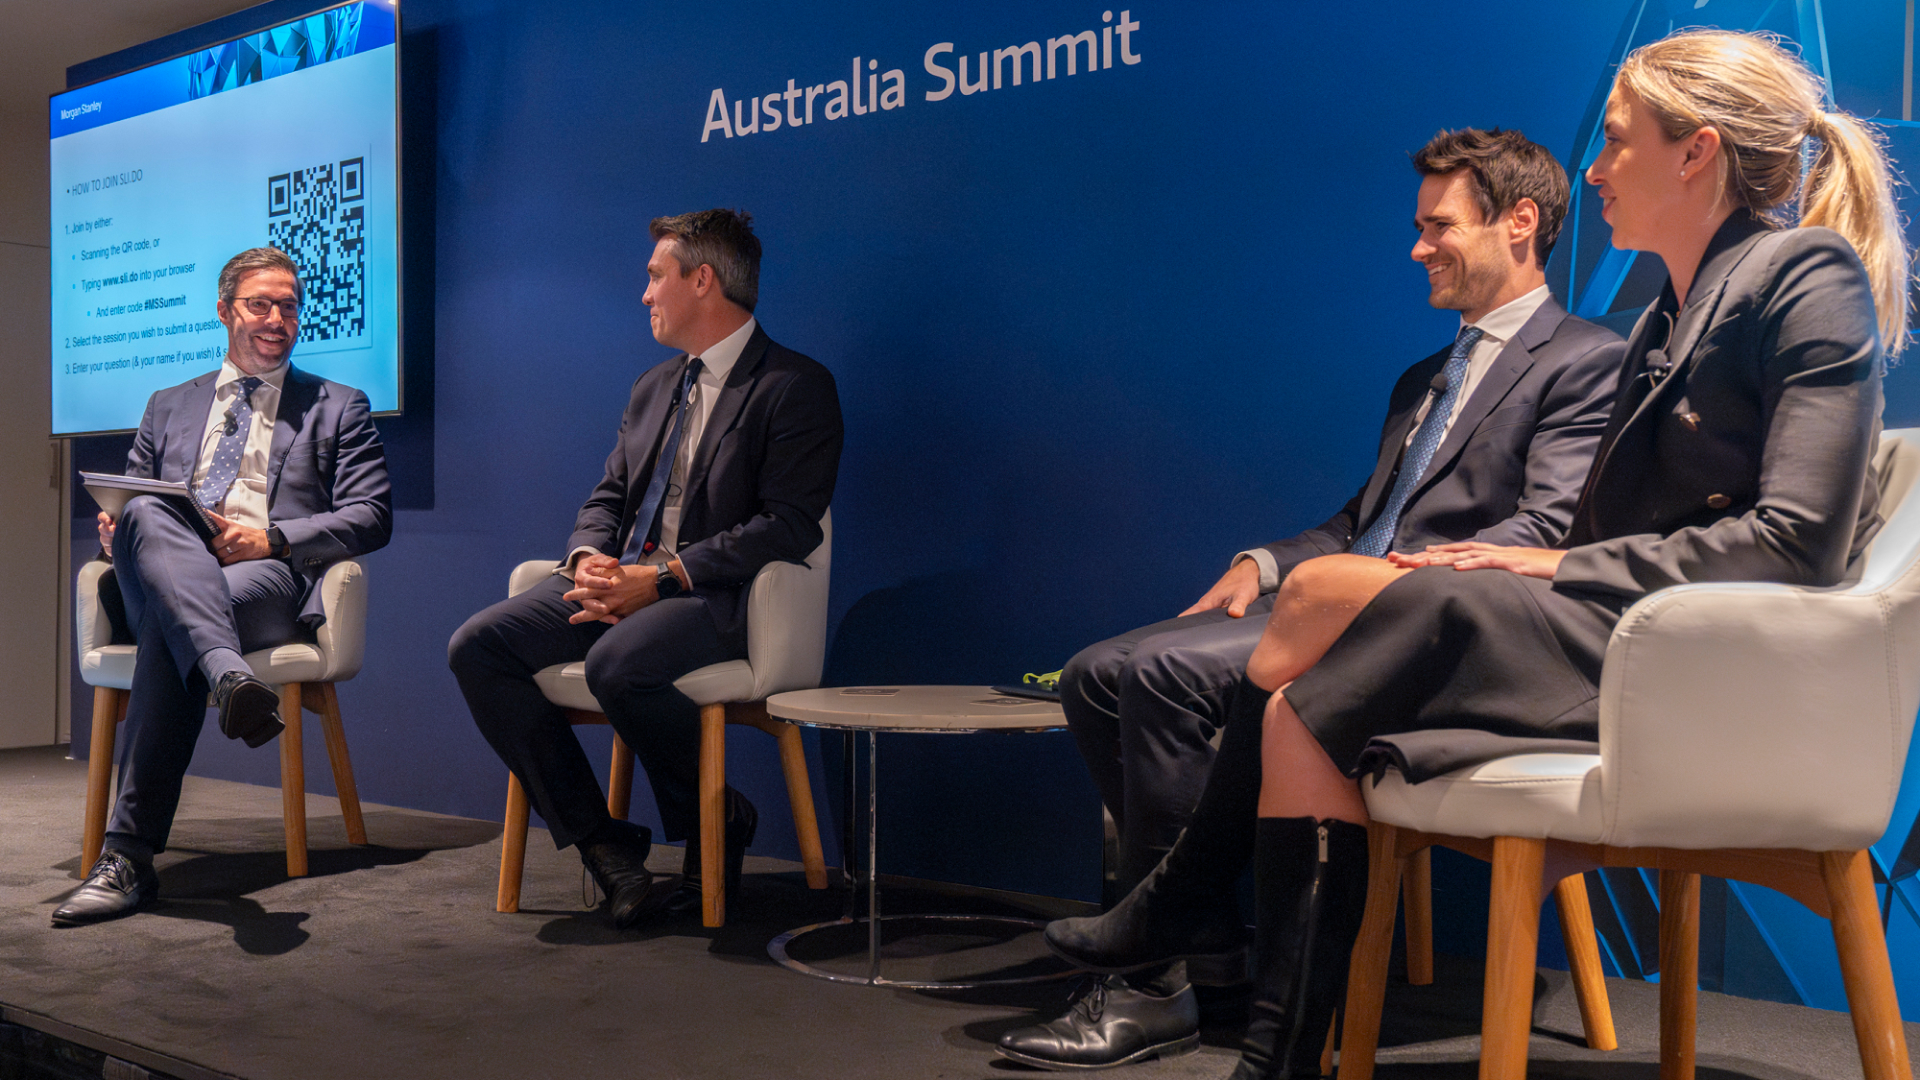 From left to right: Will MacDiarmid (Morgan Stanley), Oscar Oberg (Wilson Asset Management), Michael Higgins (Milford Asset Management), Eleanor Swanson (Firetrail Investments